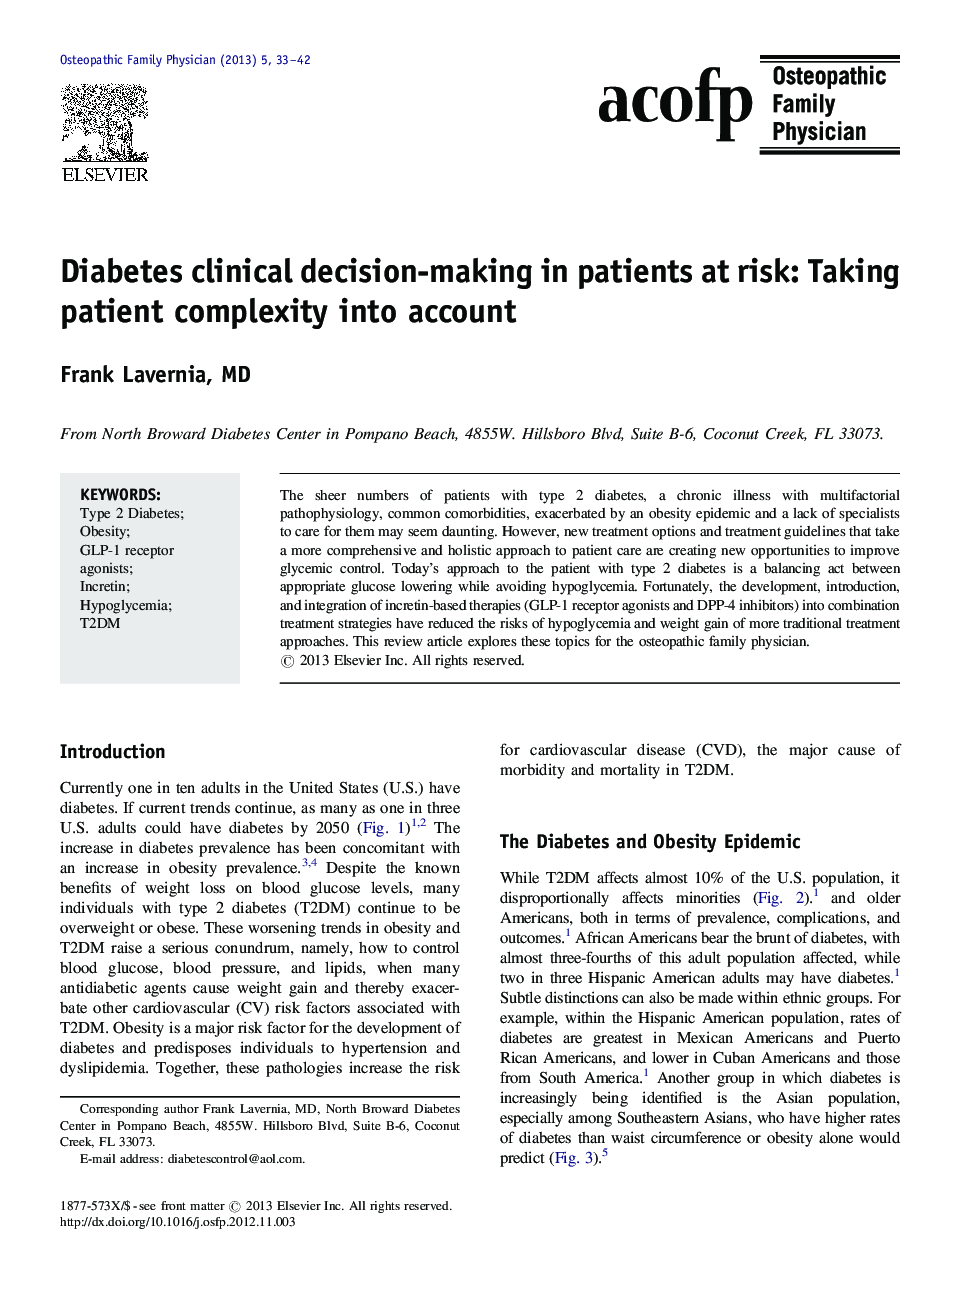 Diabetes clinical decision-making in patients at risk: Taking patient complexity into account